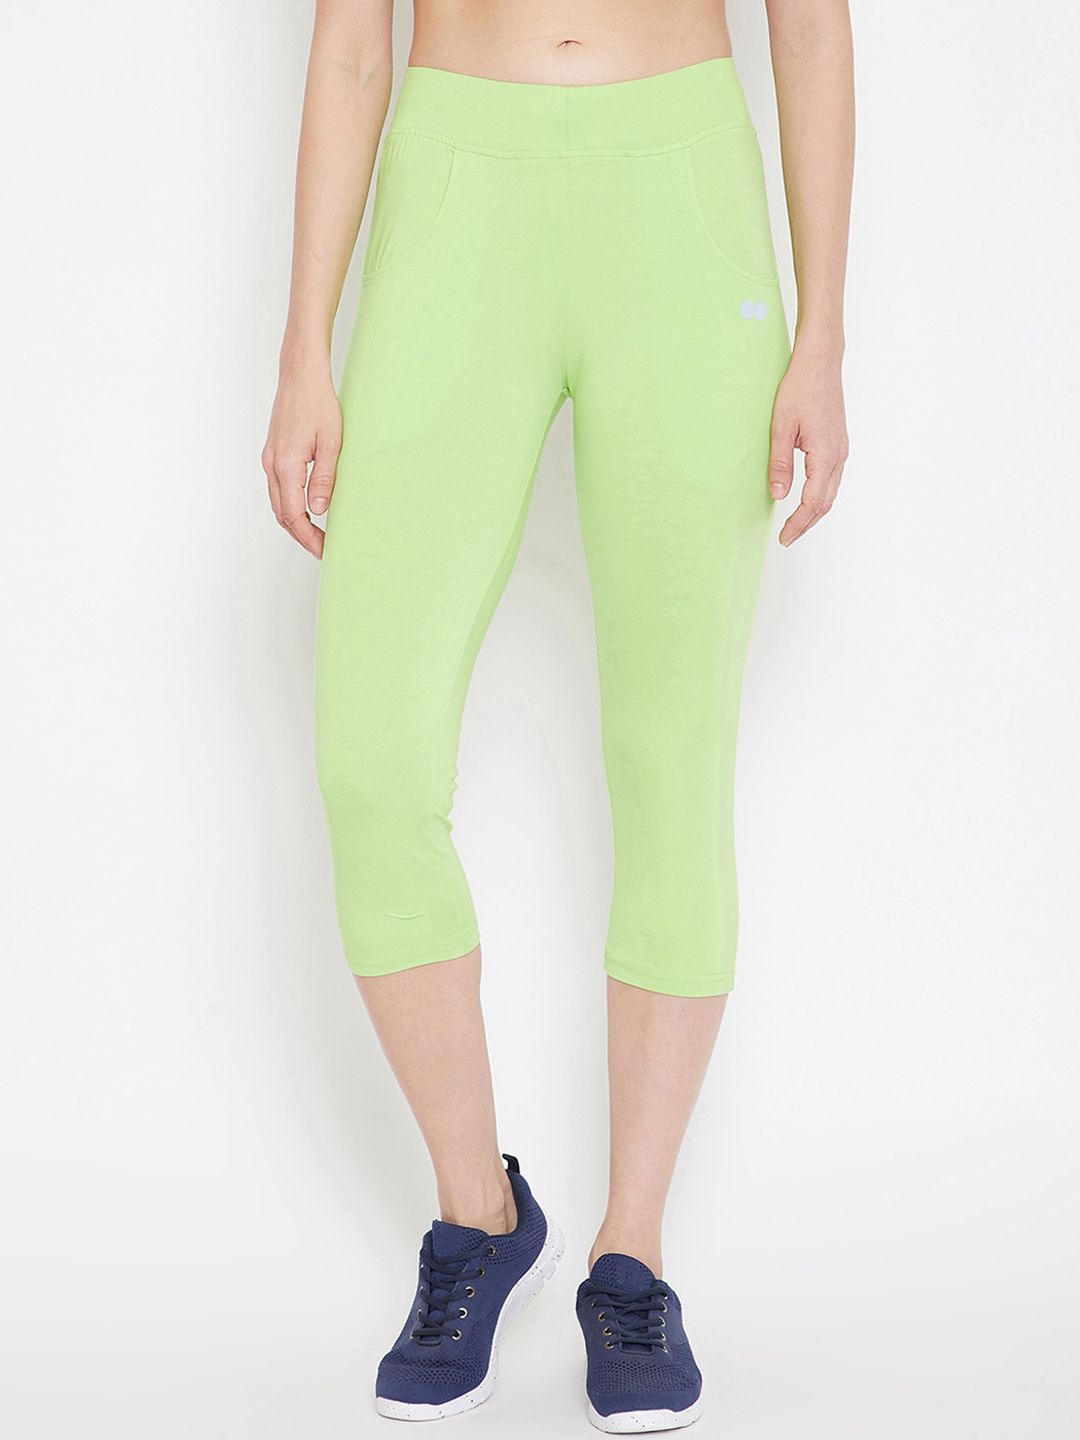 Clovia Women Lime Green Solid Snug Fit Active Capri Tights Price in India